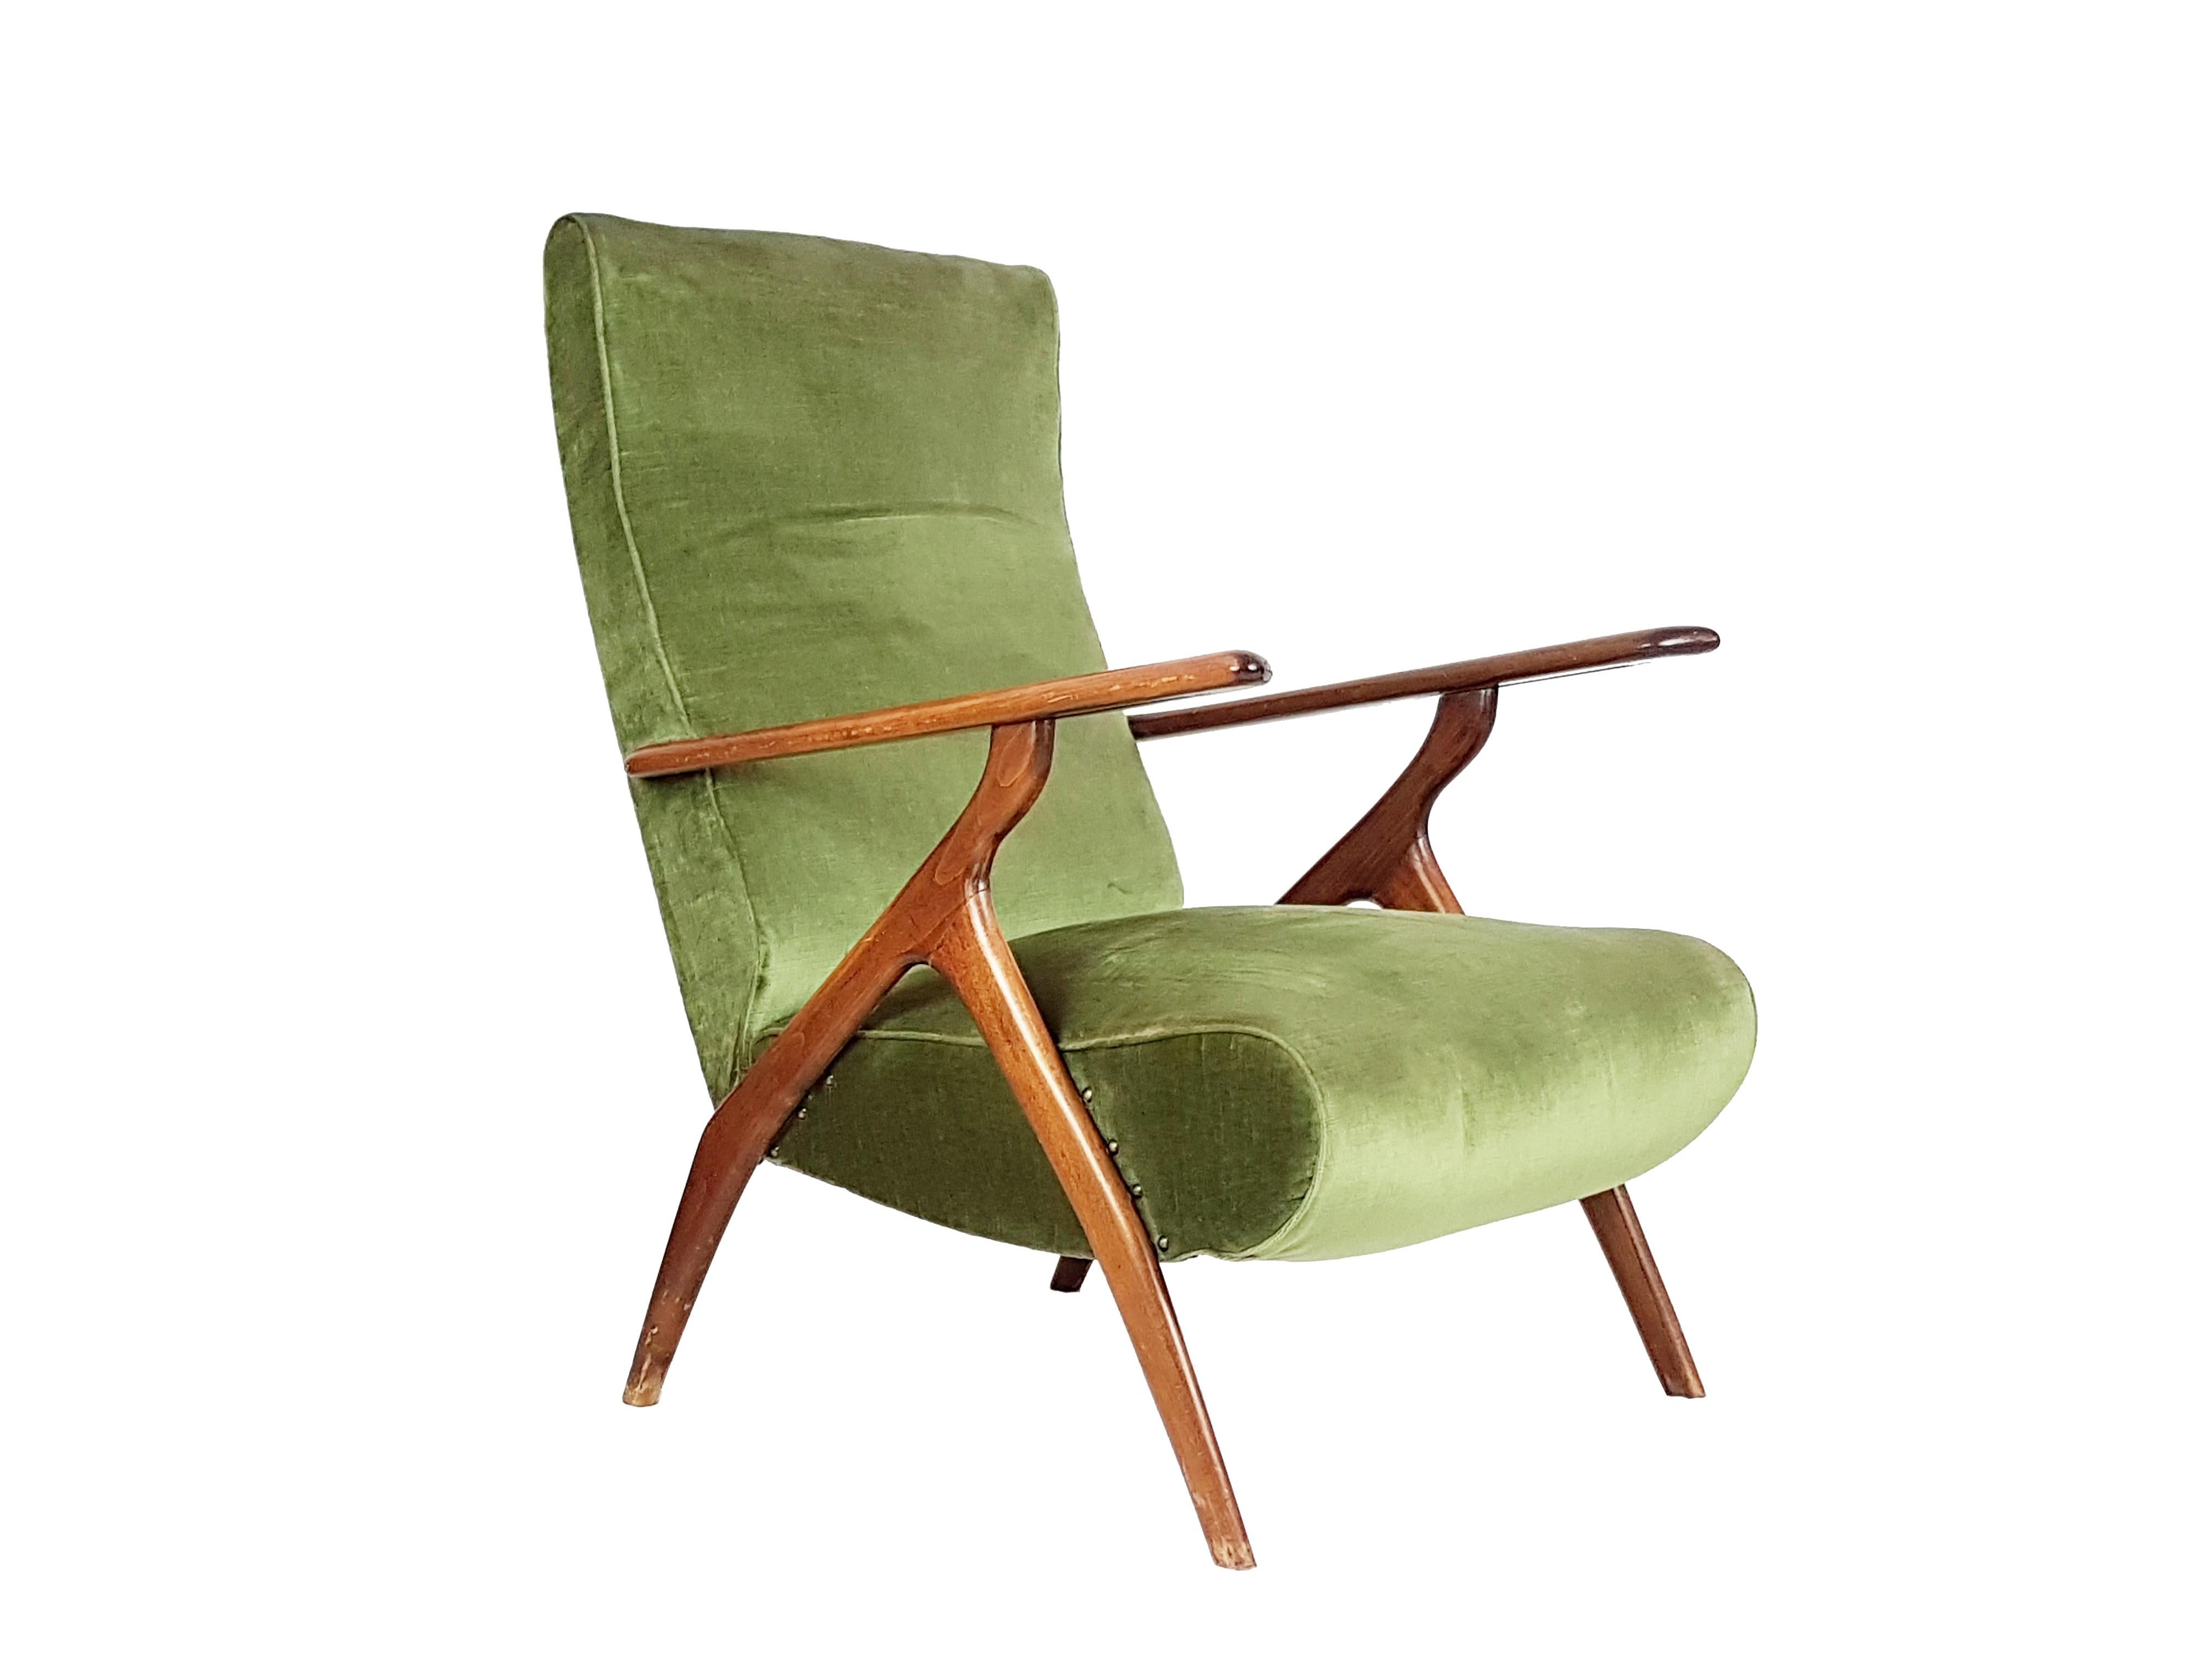 Vintage reclining armchairs in green & sugar paper velvet, wood and brass. Their style resemble similar items from Antonino Gorgone and Franco Lanzani, but more fine and elegant.
the two armchairs belong to the same reclining model, but have